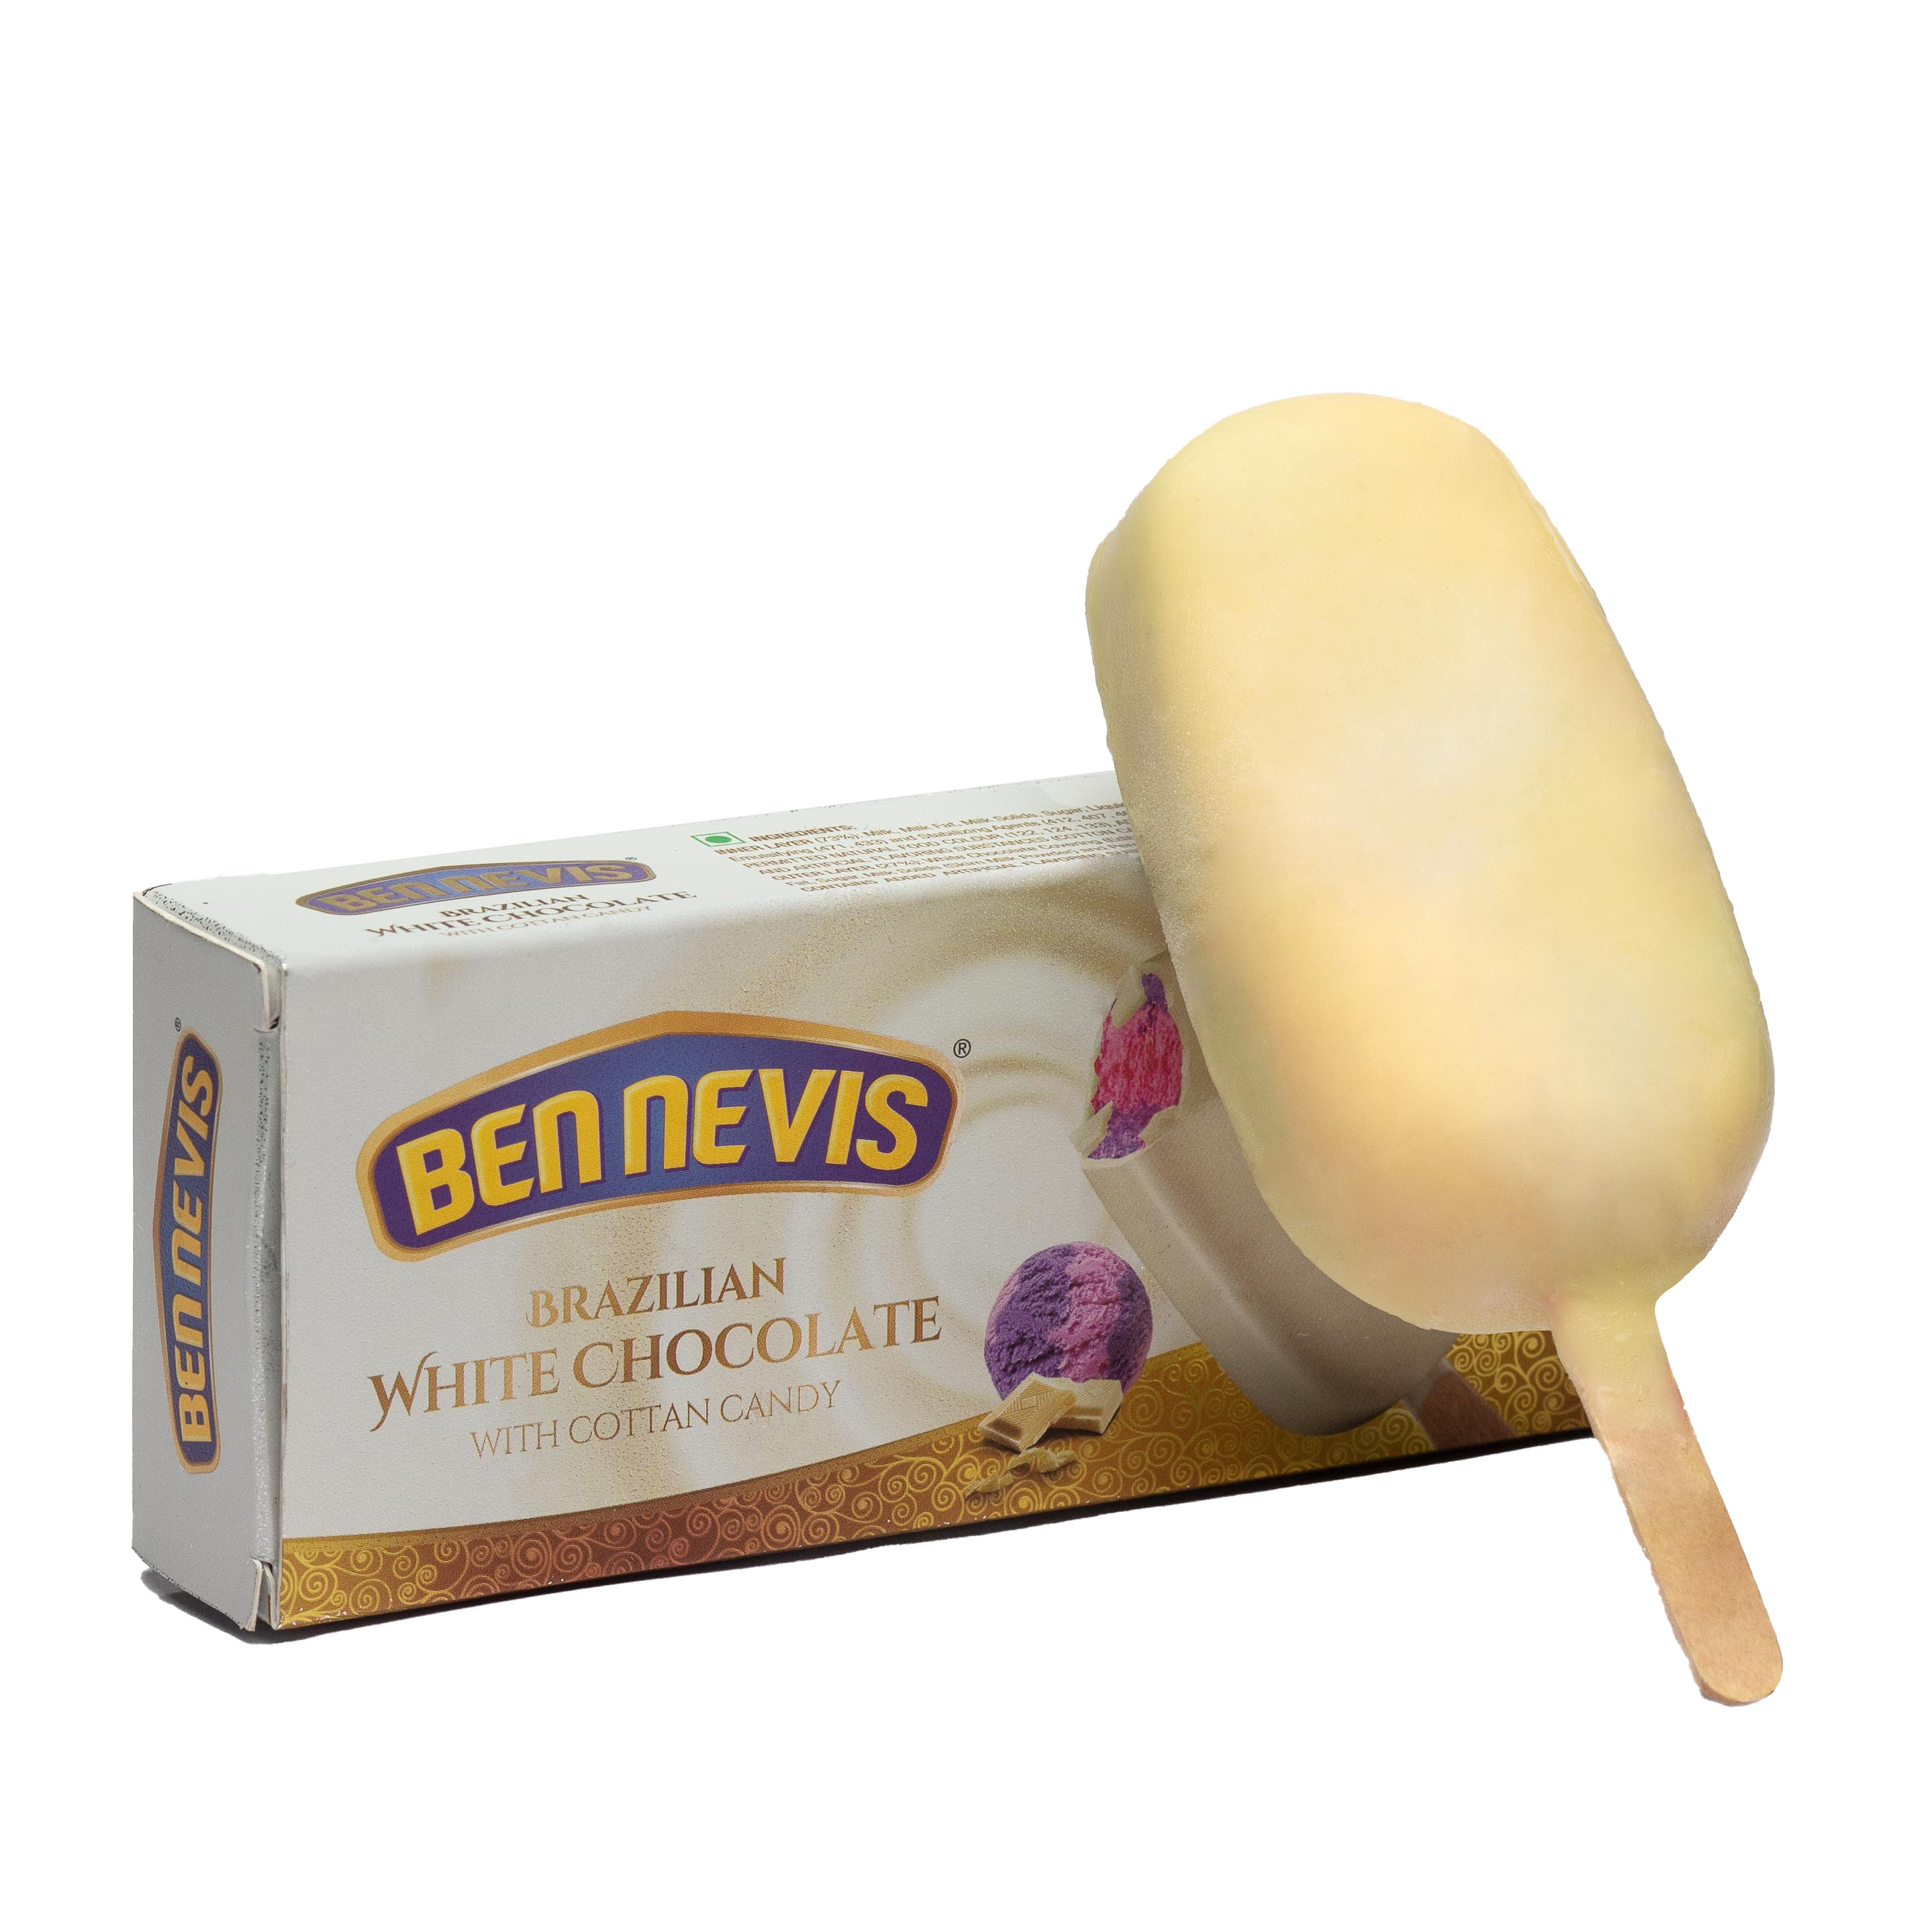 brazilian-white-chocolate-with-cotton-candy-bar-6565